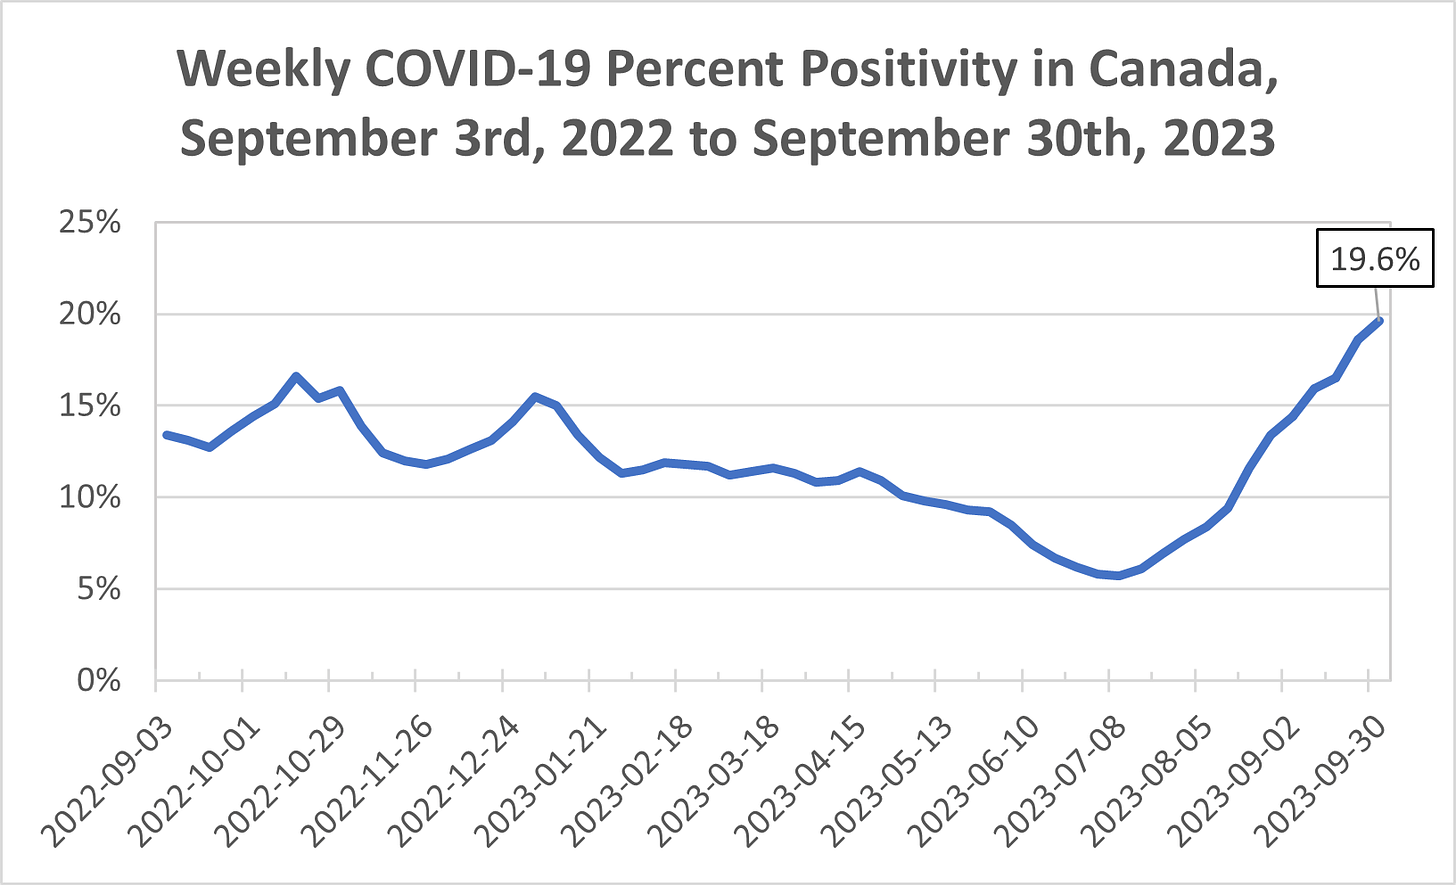 Chart showing COVID-19 percent positivity in Canada from September 3rd, 2022 to September 30th, 2023. Percent positivity begins around 14%, fluctuating while decreasing overall until hitting 6% in mid-July 2023. It then rises by about 1-2 percentage points per week until reaching 19.6% in the most recent week.